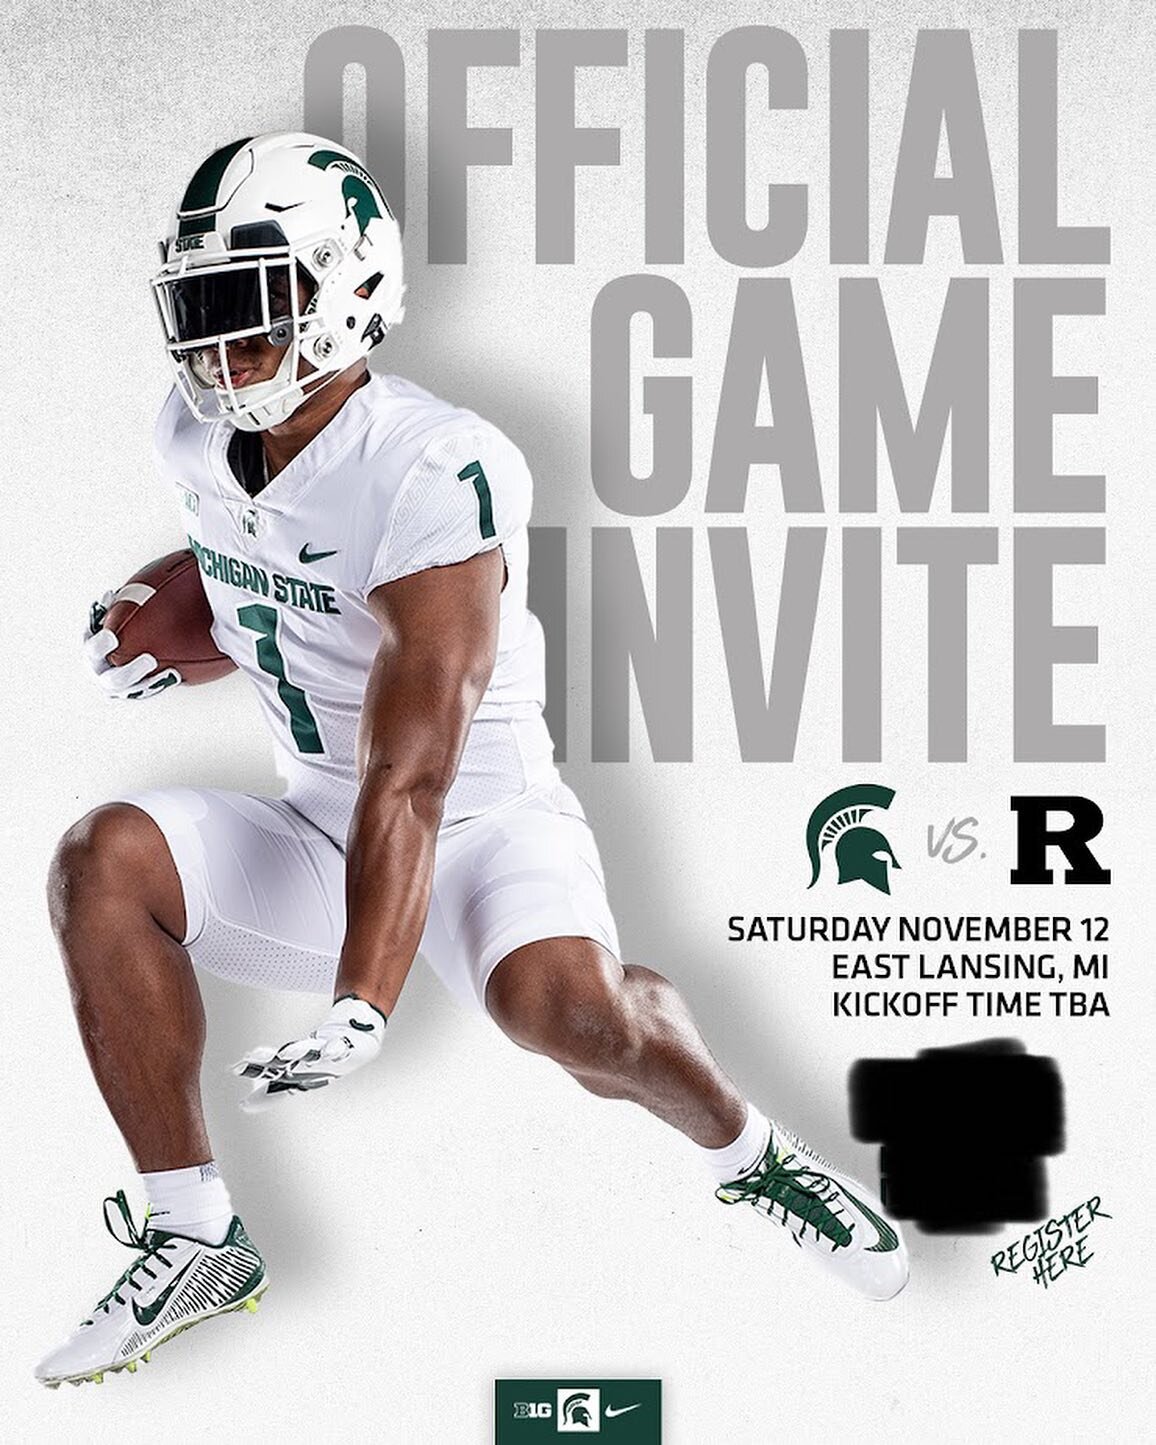 We are excited to be invited to the game and able to take young athletes to the @msu_football game.  Let&rsquo;s start something great! #Passion #purpose